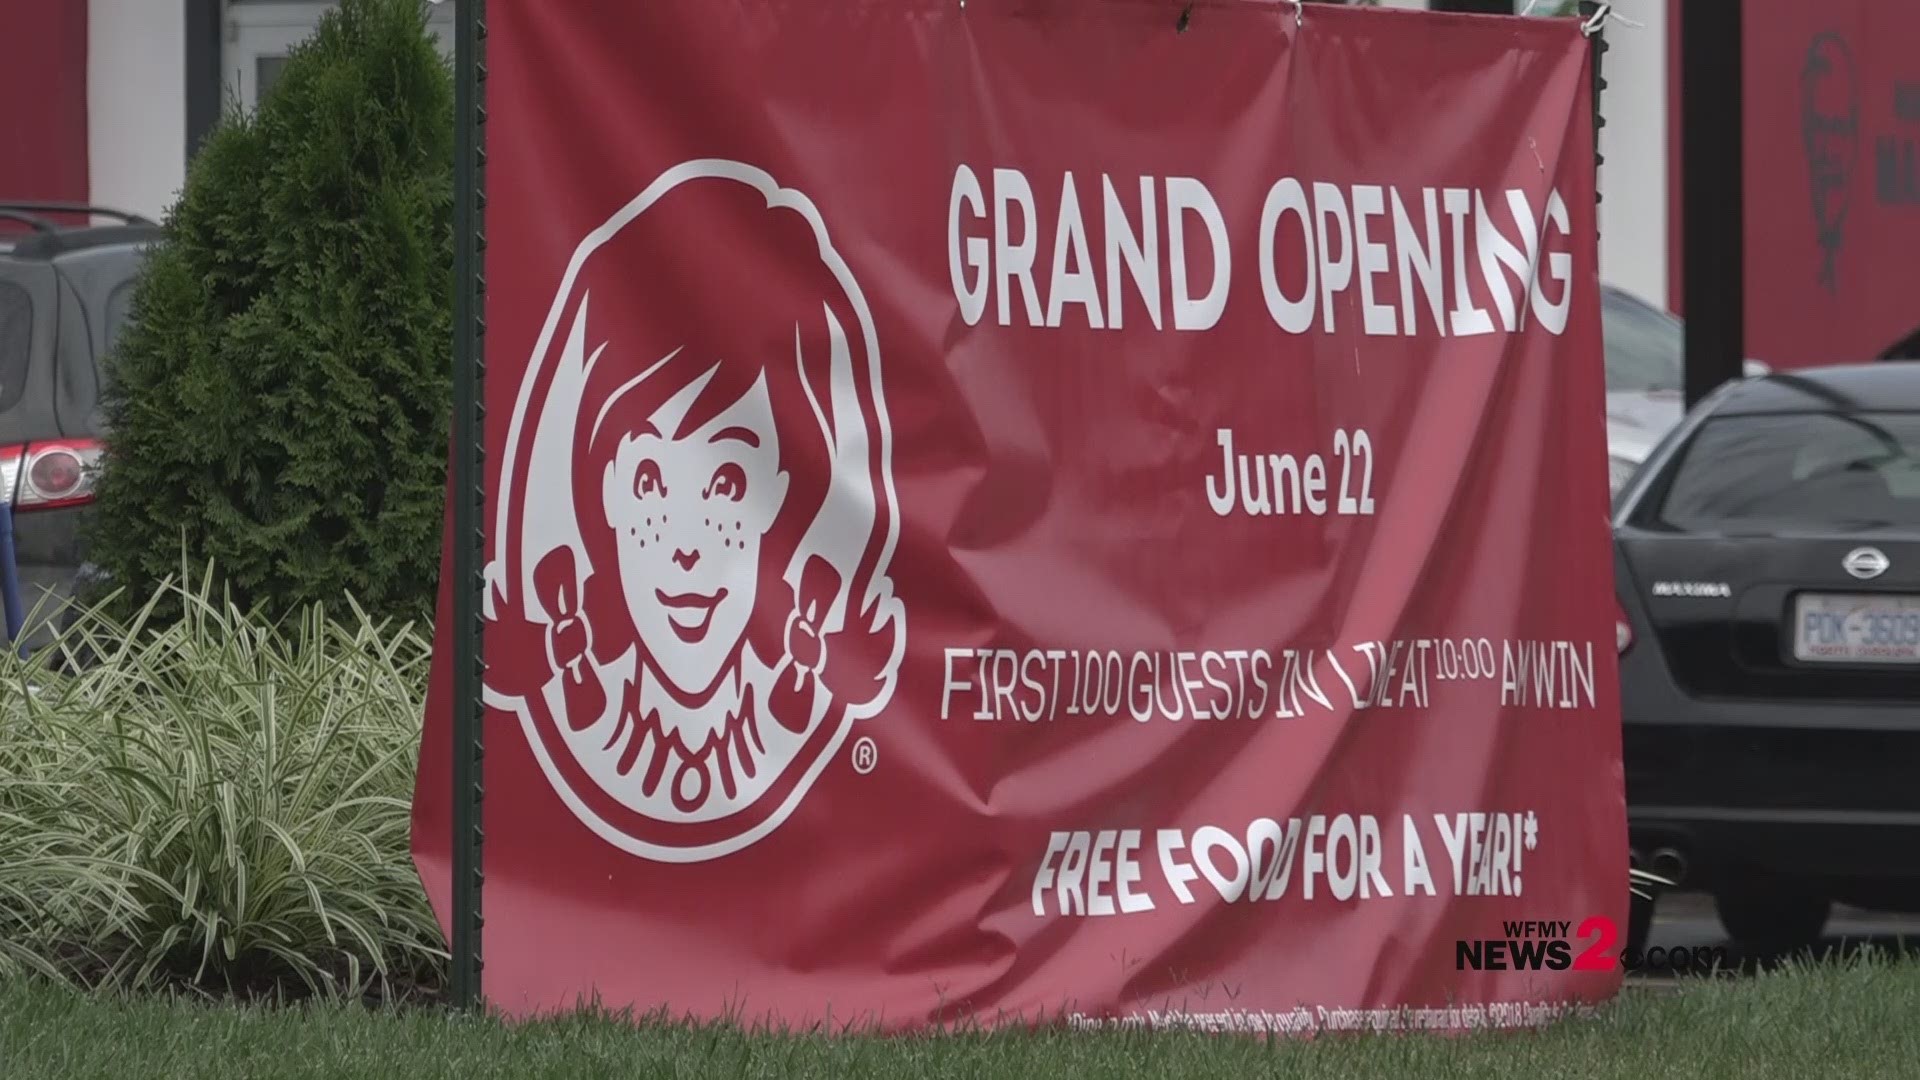 A new Wendy's location opened on Sand's Drive in Greensboro and people lined up for a chance to win free food for an entire year.